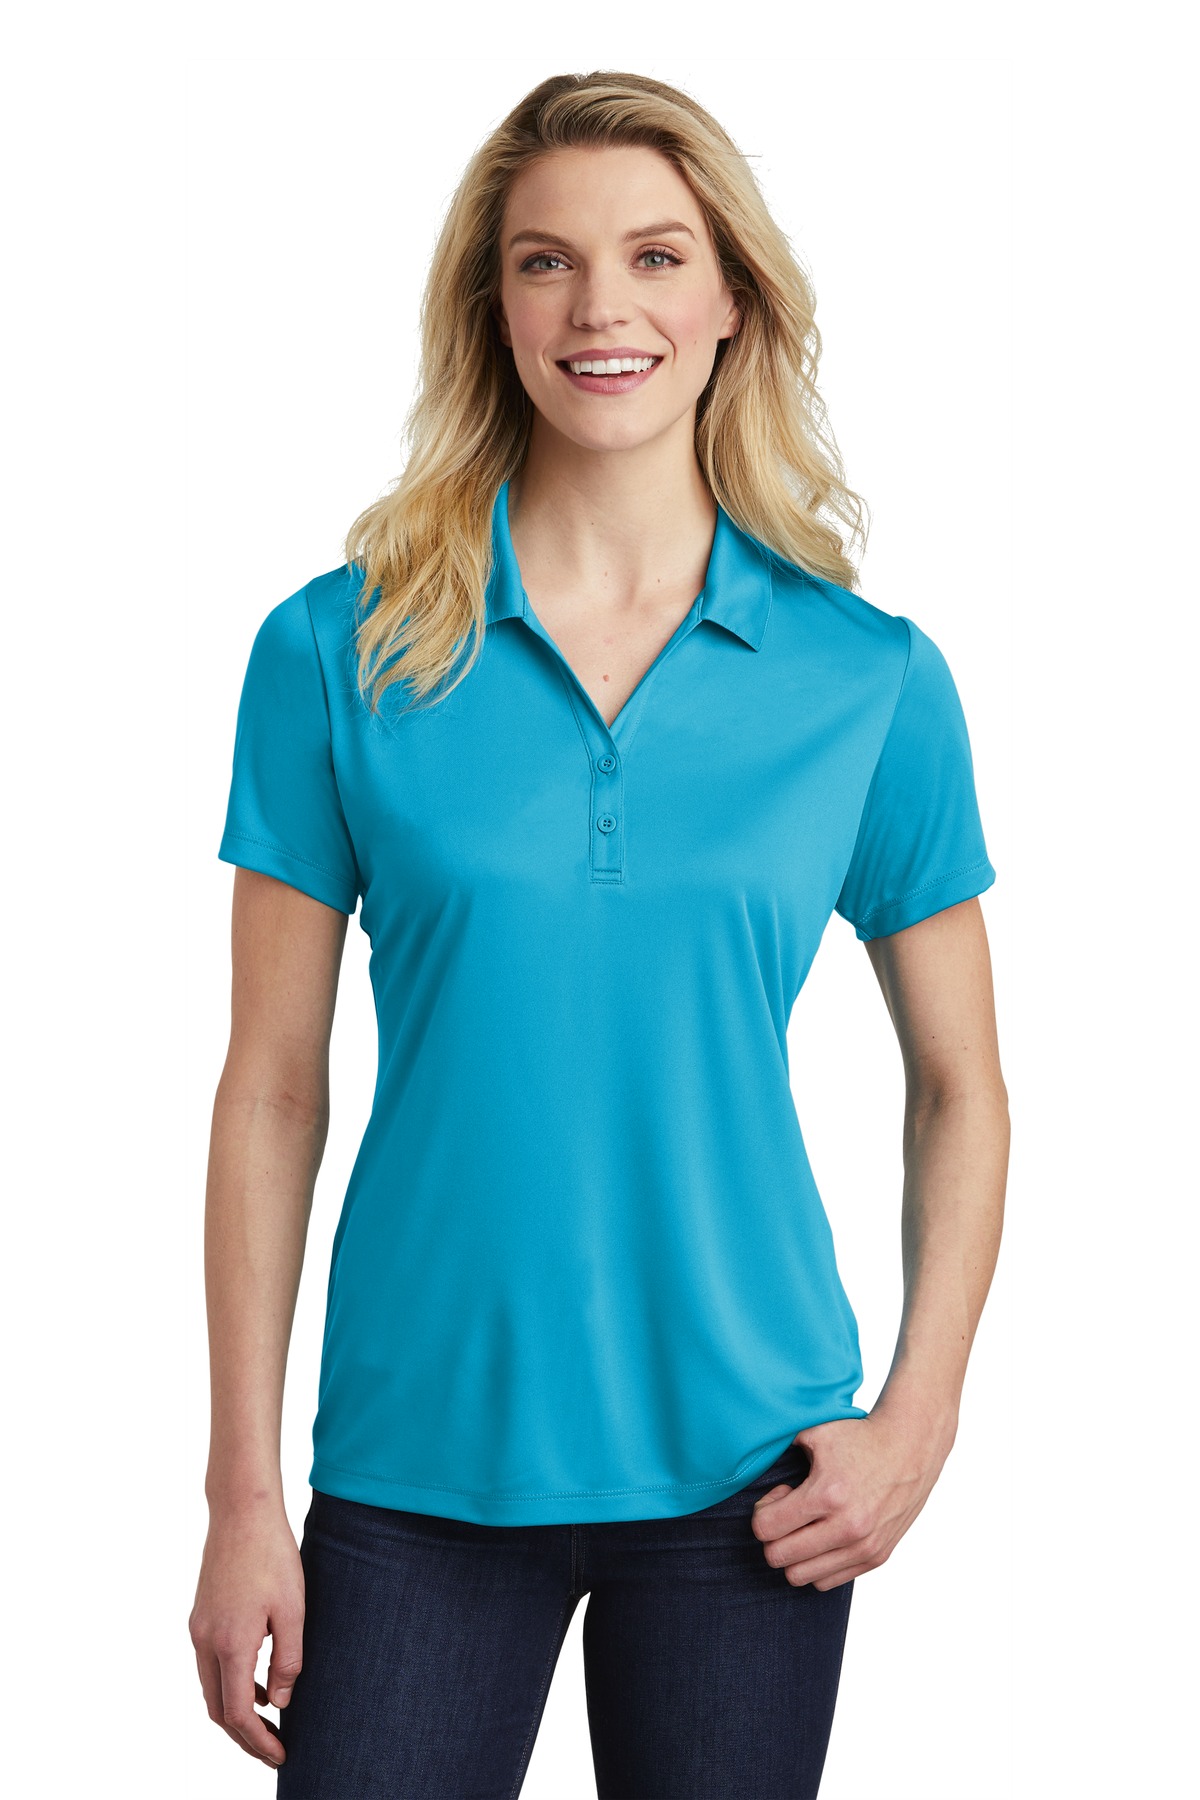 Sport-Tek Ladies PosiCharge Competitor Polo - LST550